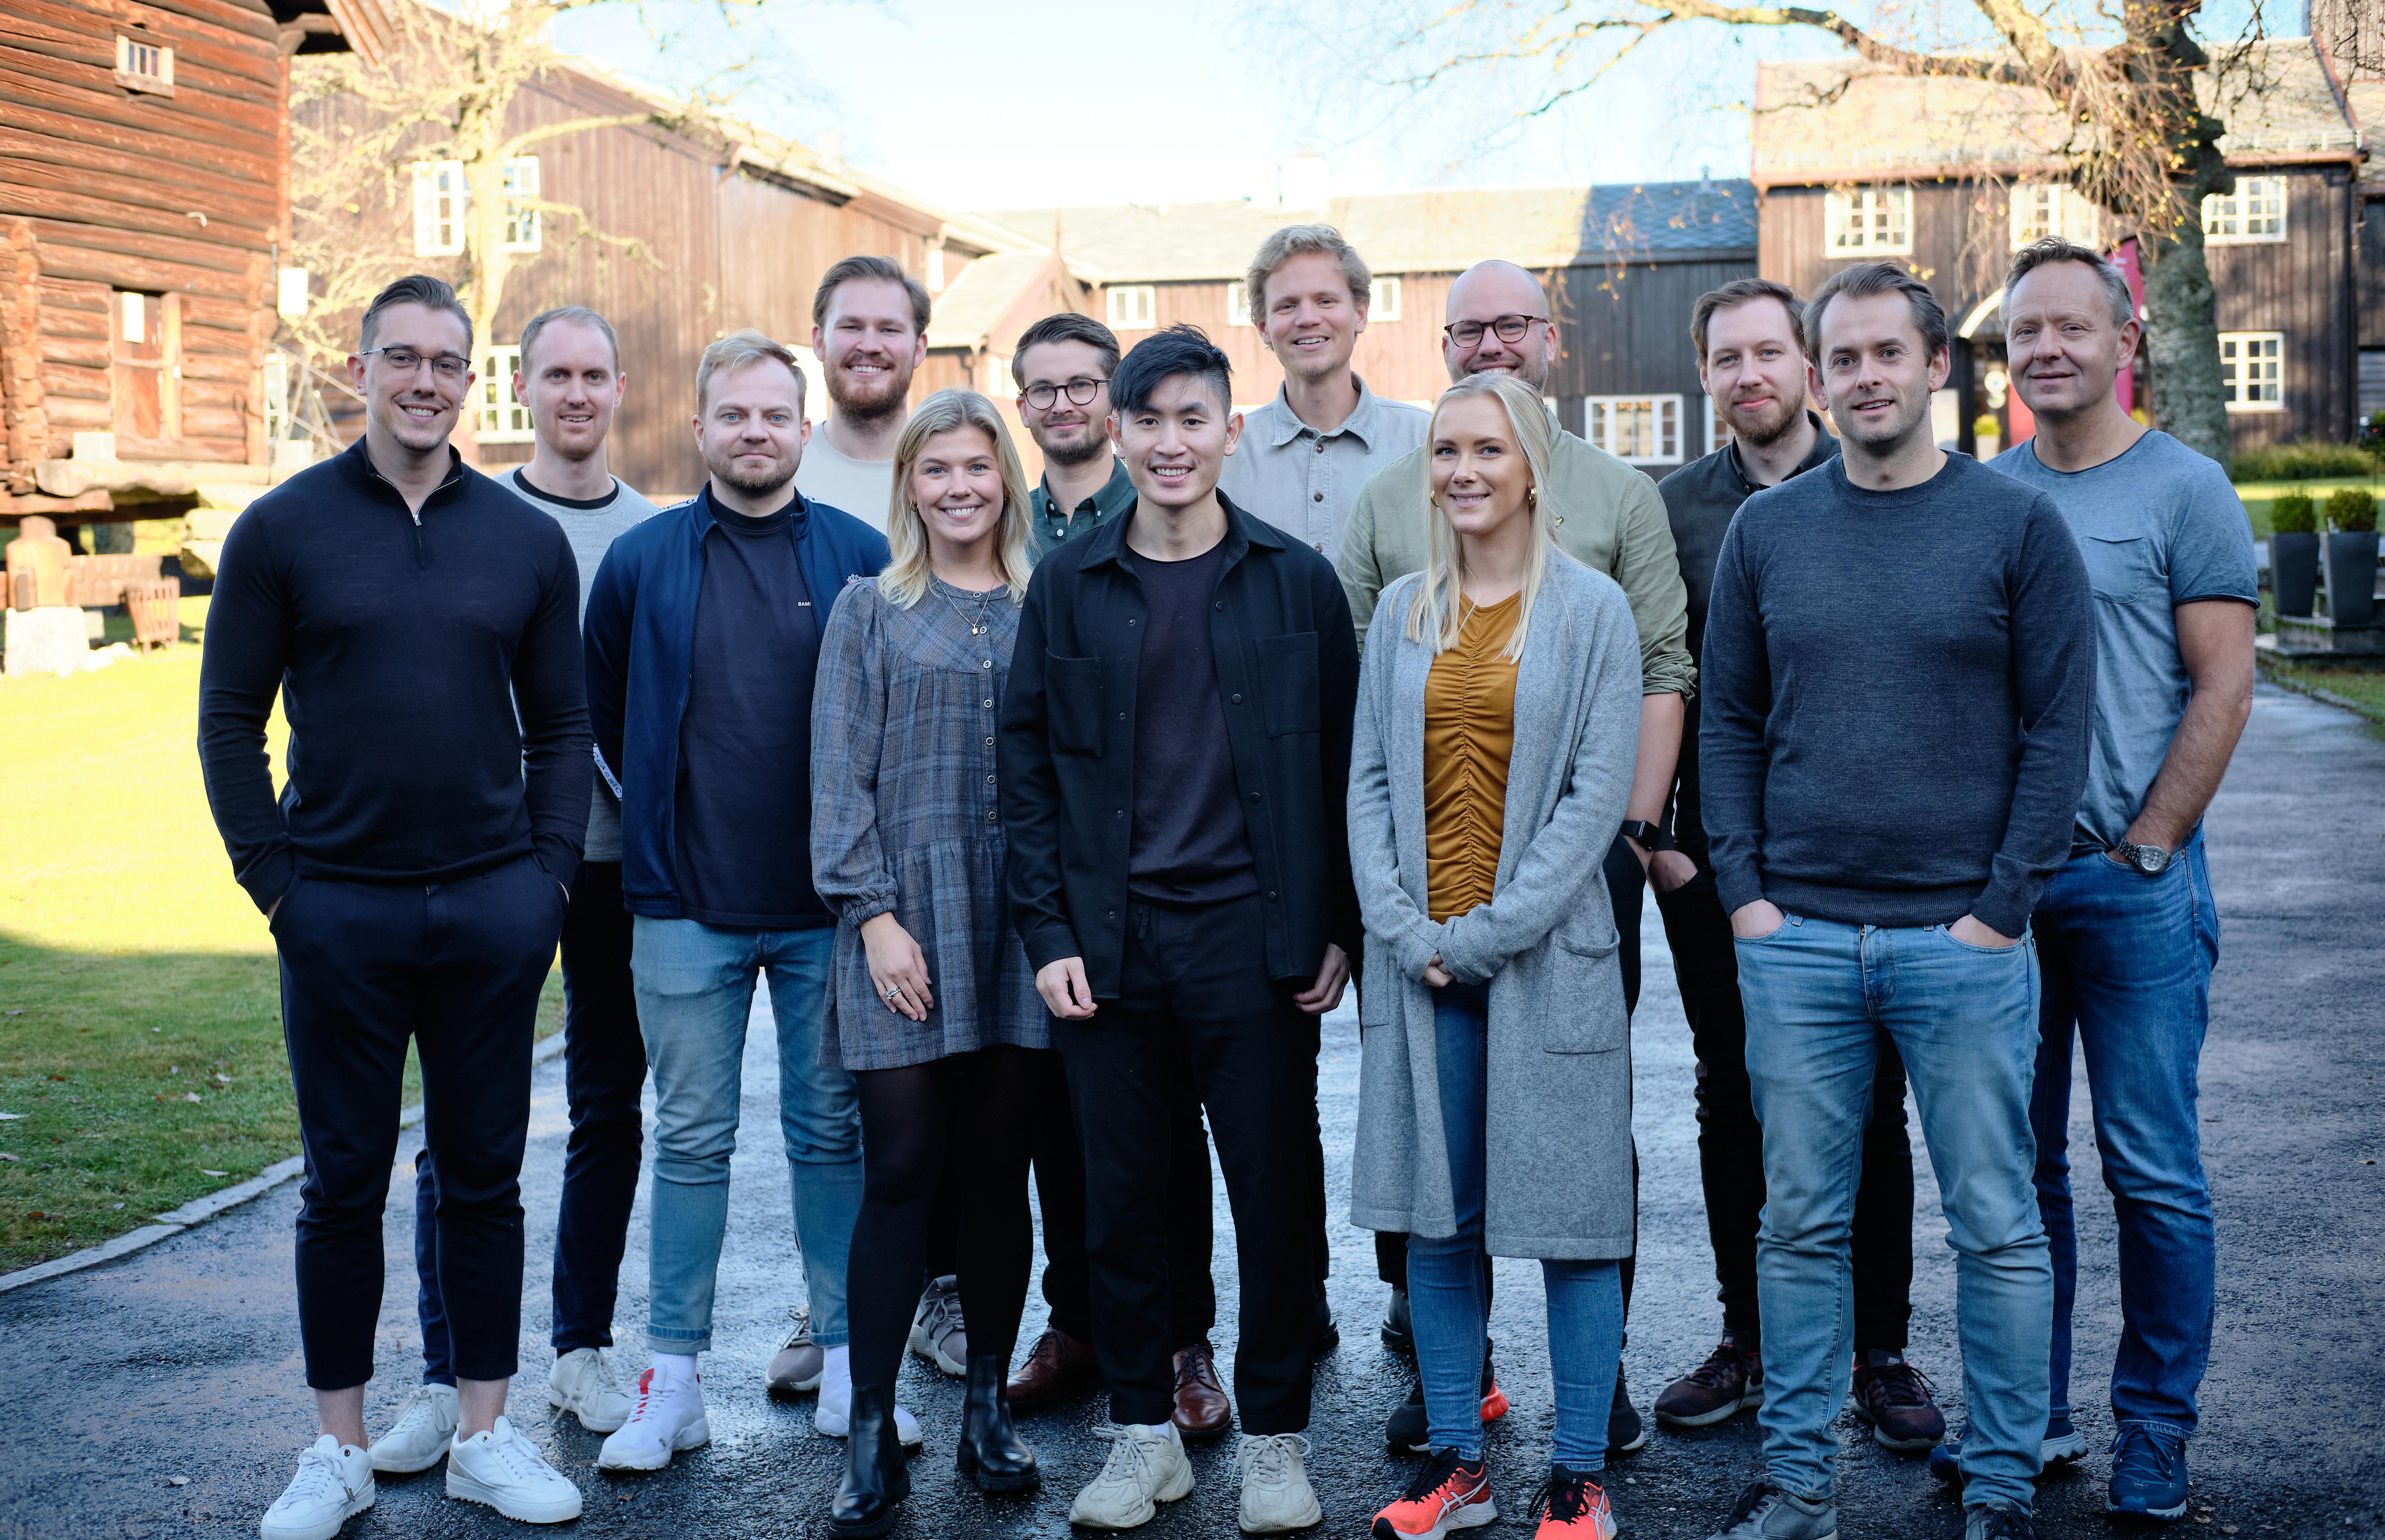 A team picture of 13 ShiftX employees at Lysebu, Oslo